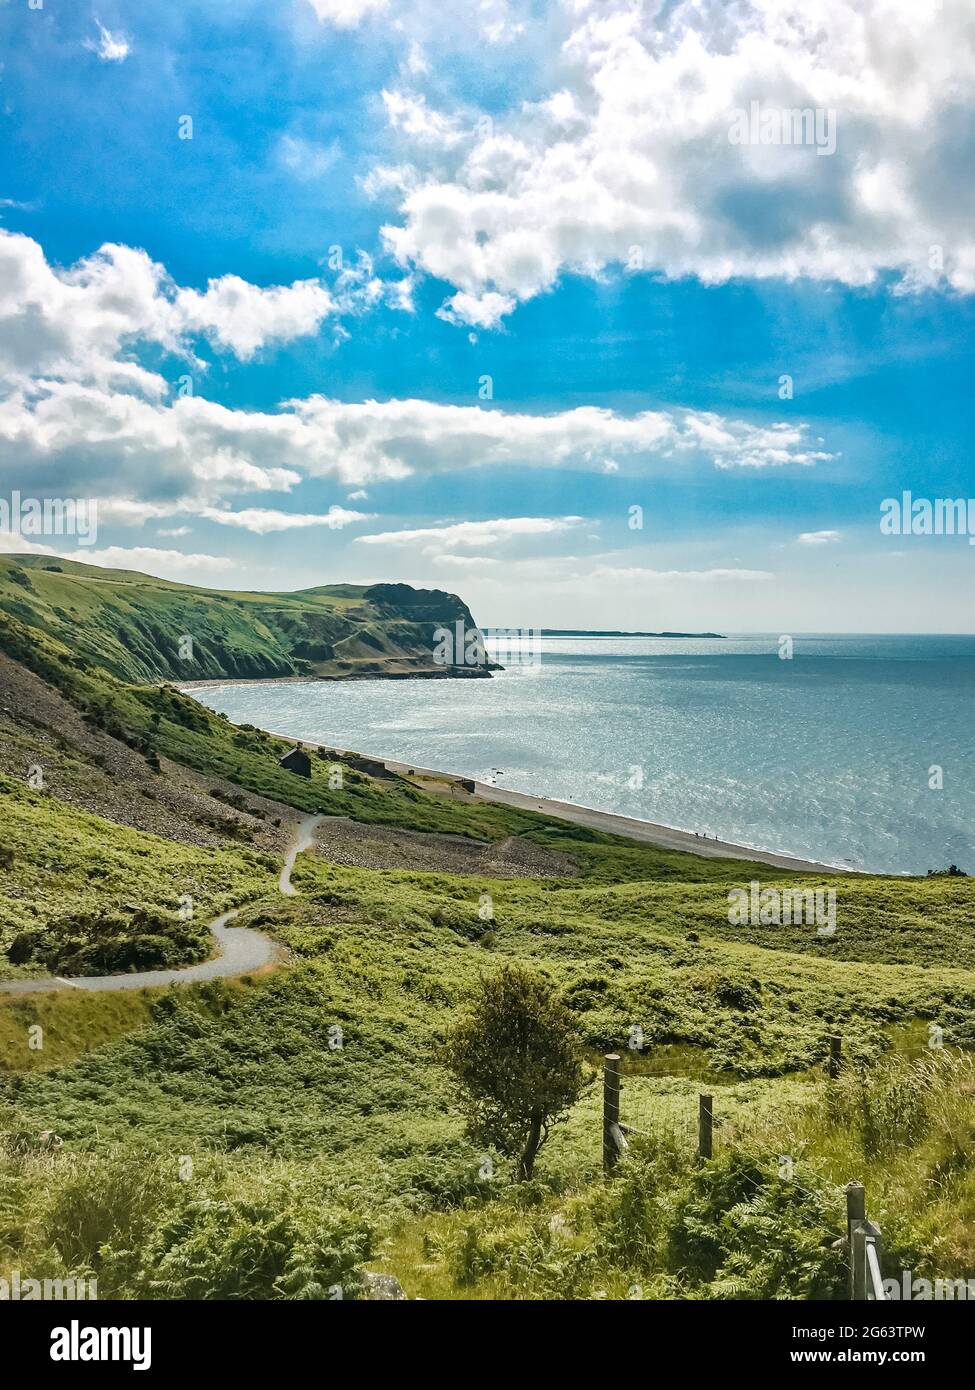 Beautiful scenery and landscape of the coast, sea, sky and mountainous region at Nant Gwrtheyrn, North Wales Stock Photo